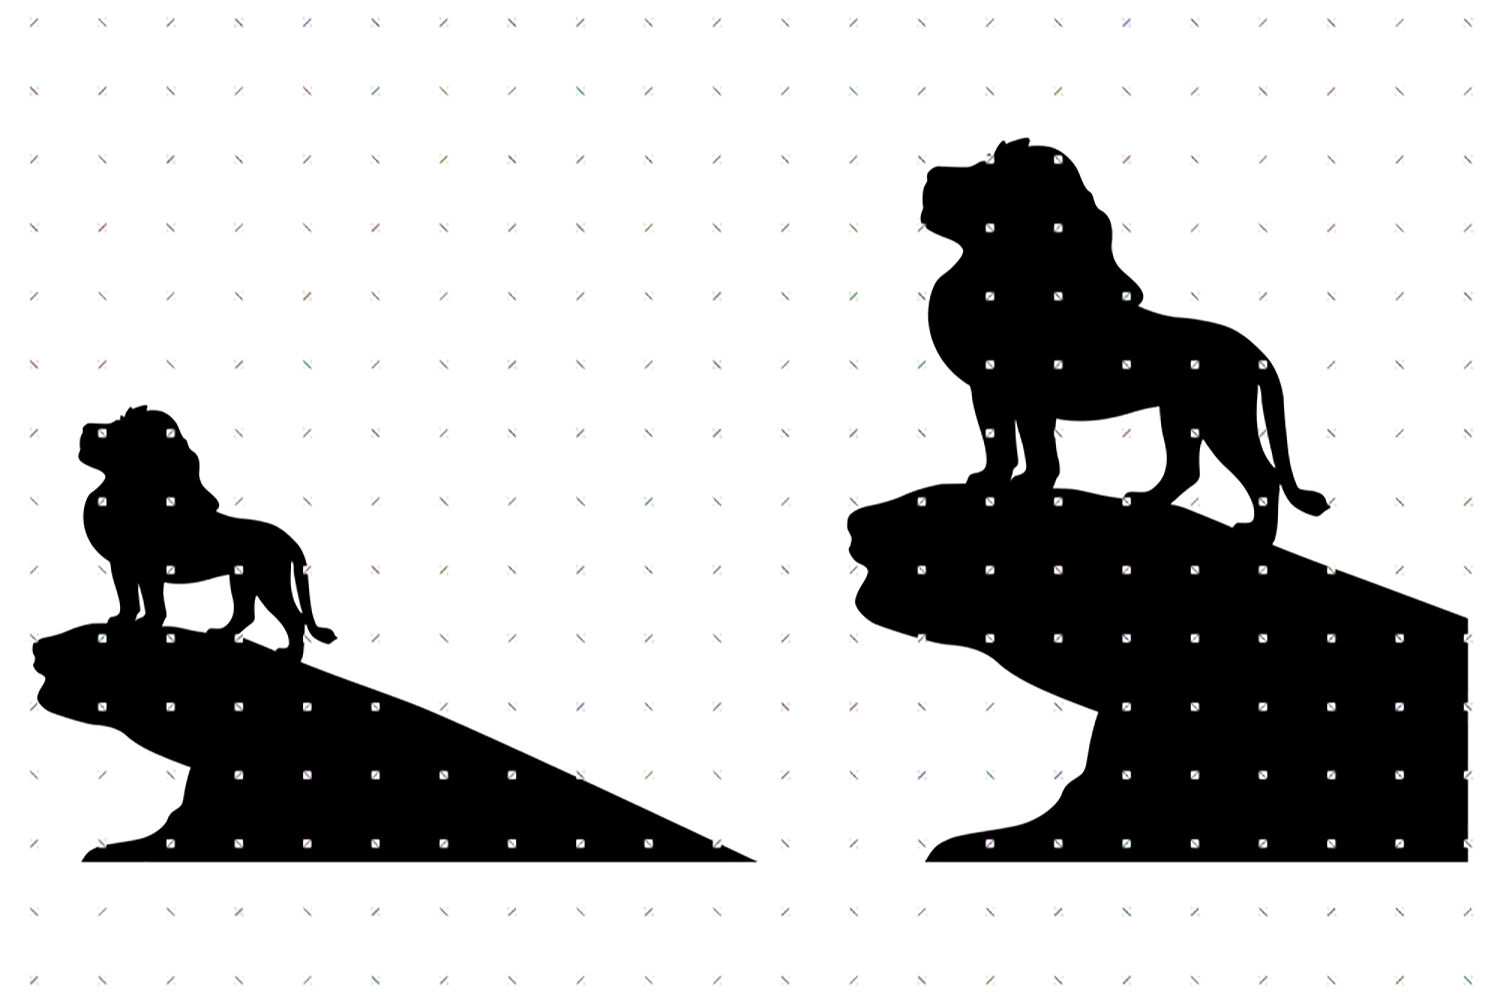 standing lion silhouette